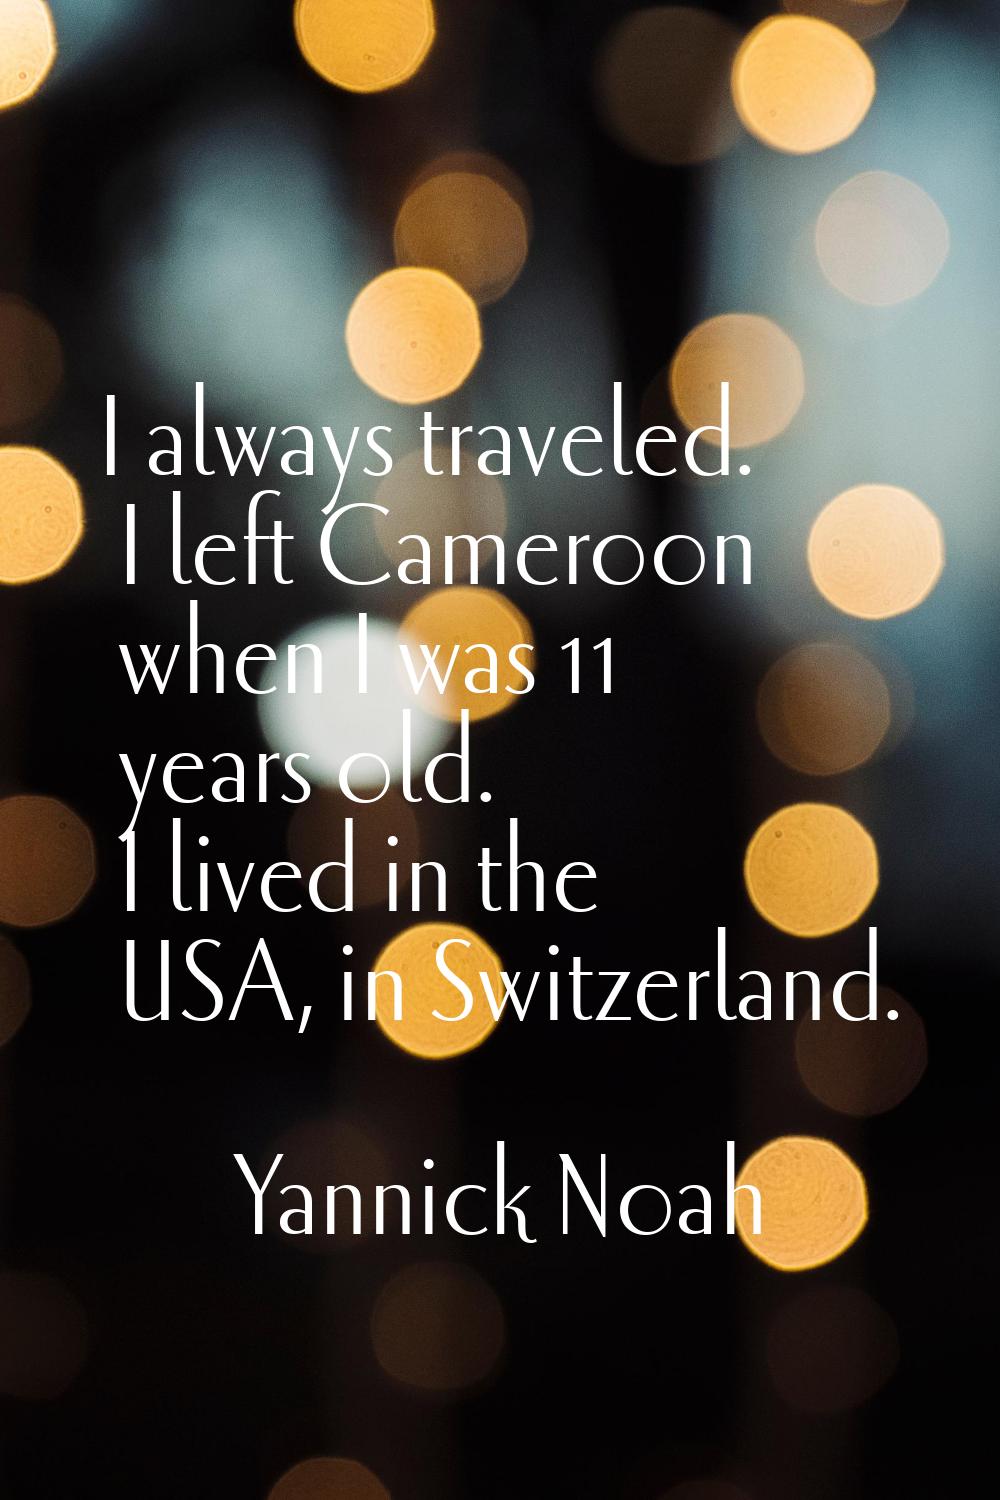 I always traveled. I left Cameroon when I was 11 years old. I lived in the USA, in Switzerland.